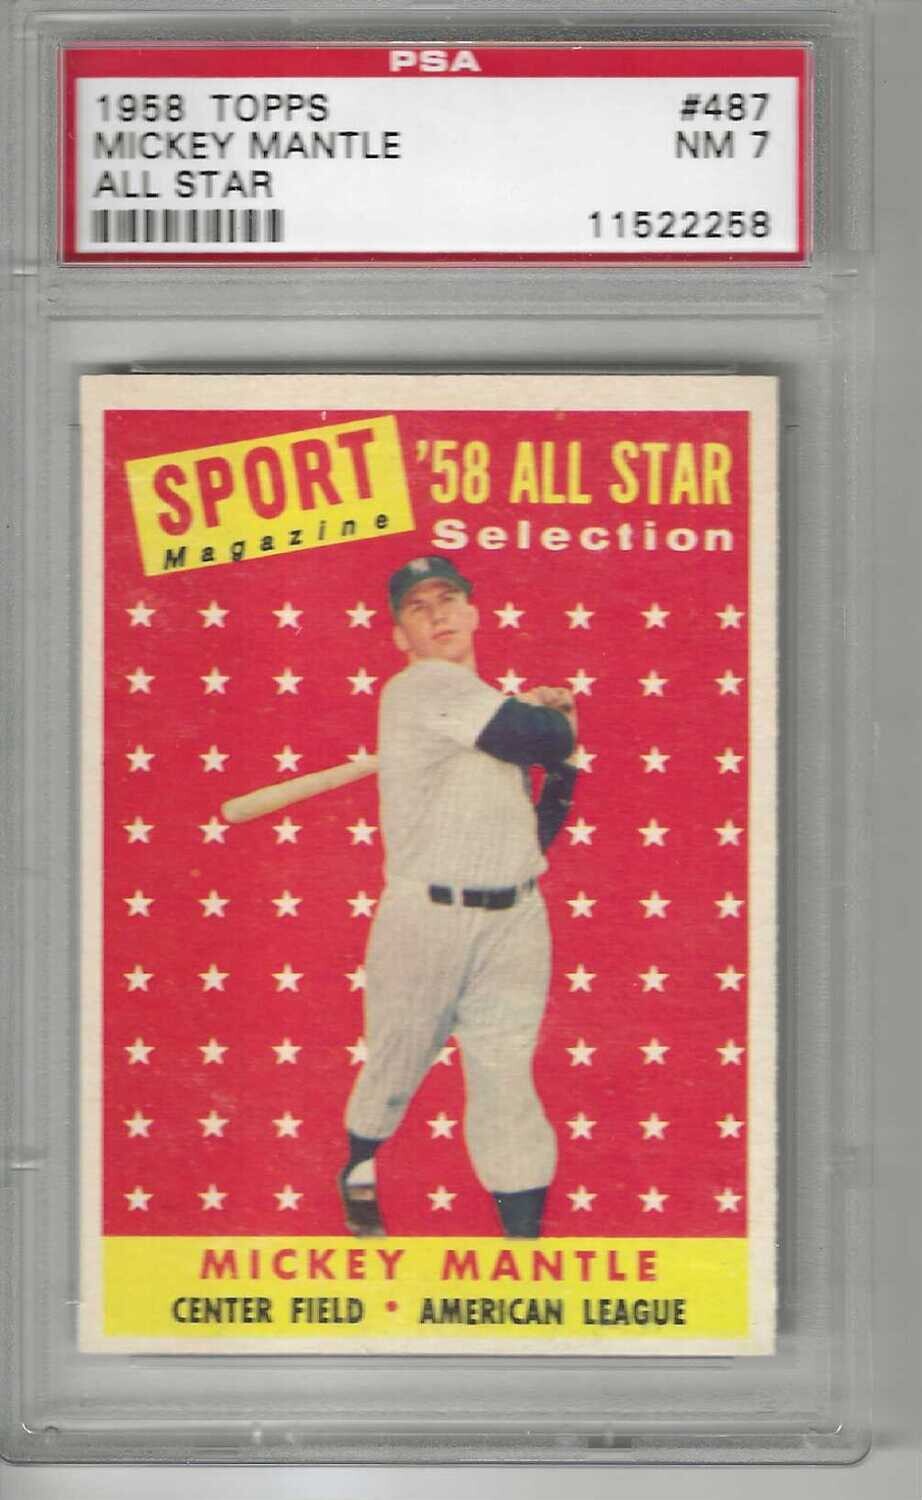 1958 Topps #487 Mickey Mantle All-Star PSA 7